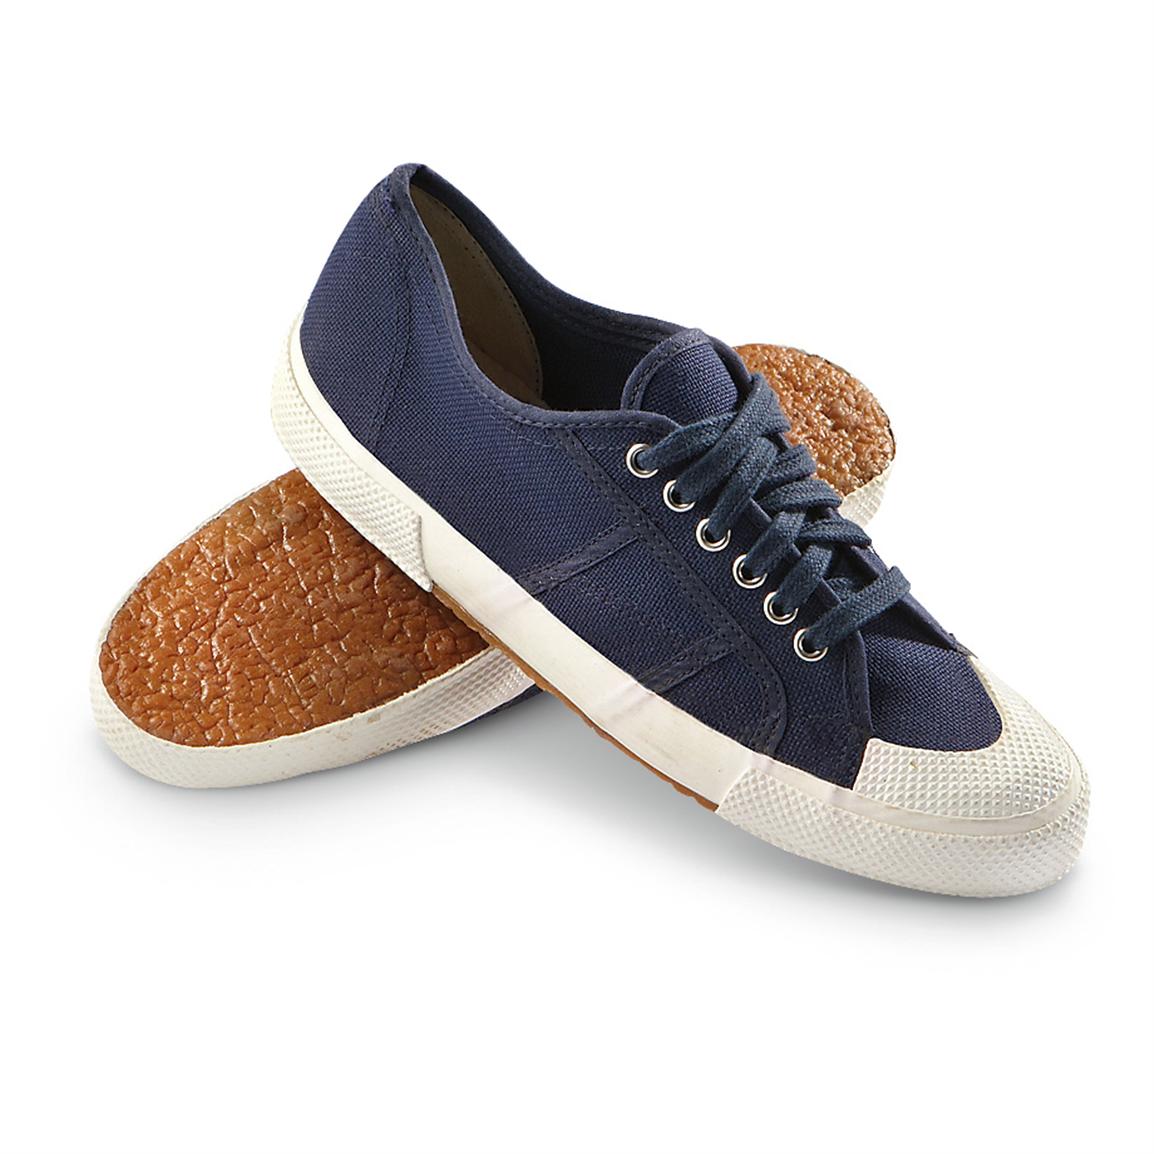 New Italian Navy Canvas Deck Shoes, Navy Blue` - 223058, Running Shoes ...